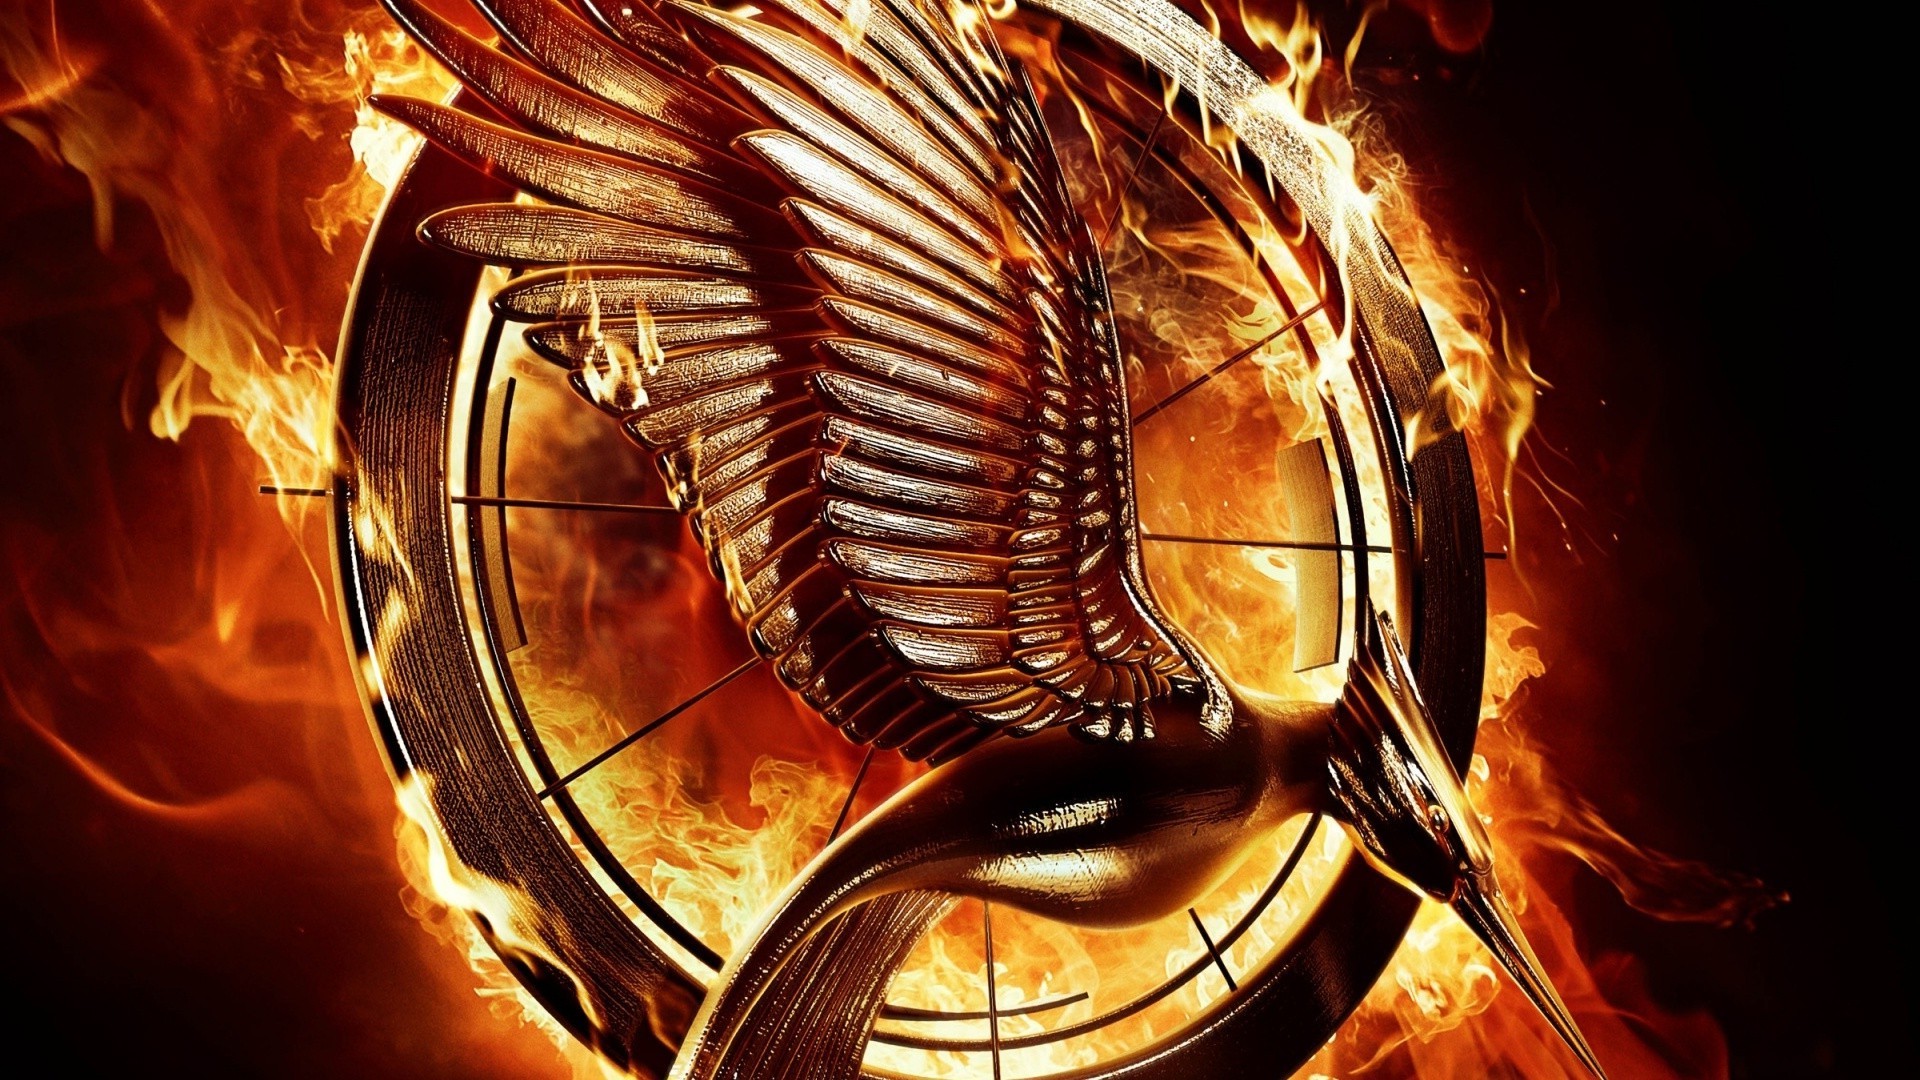 where can i download the hunger games movie for free